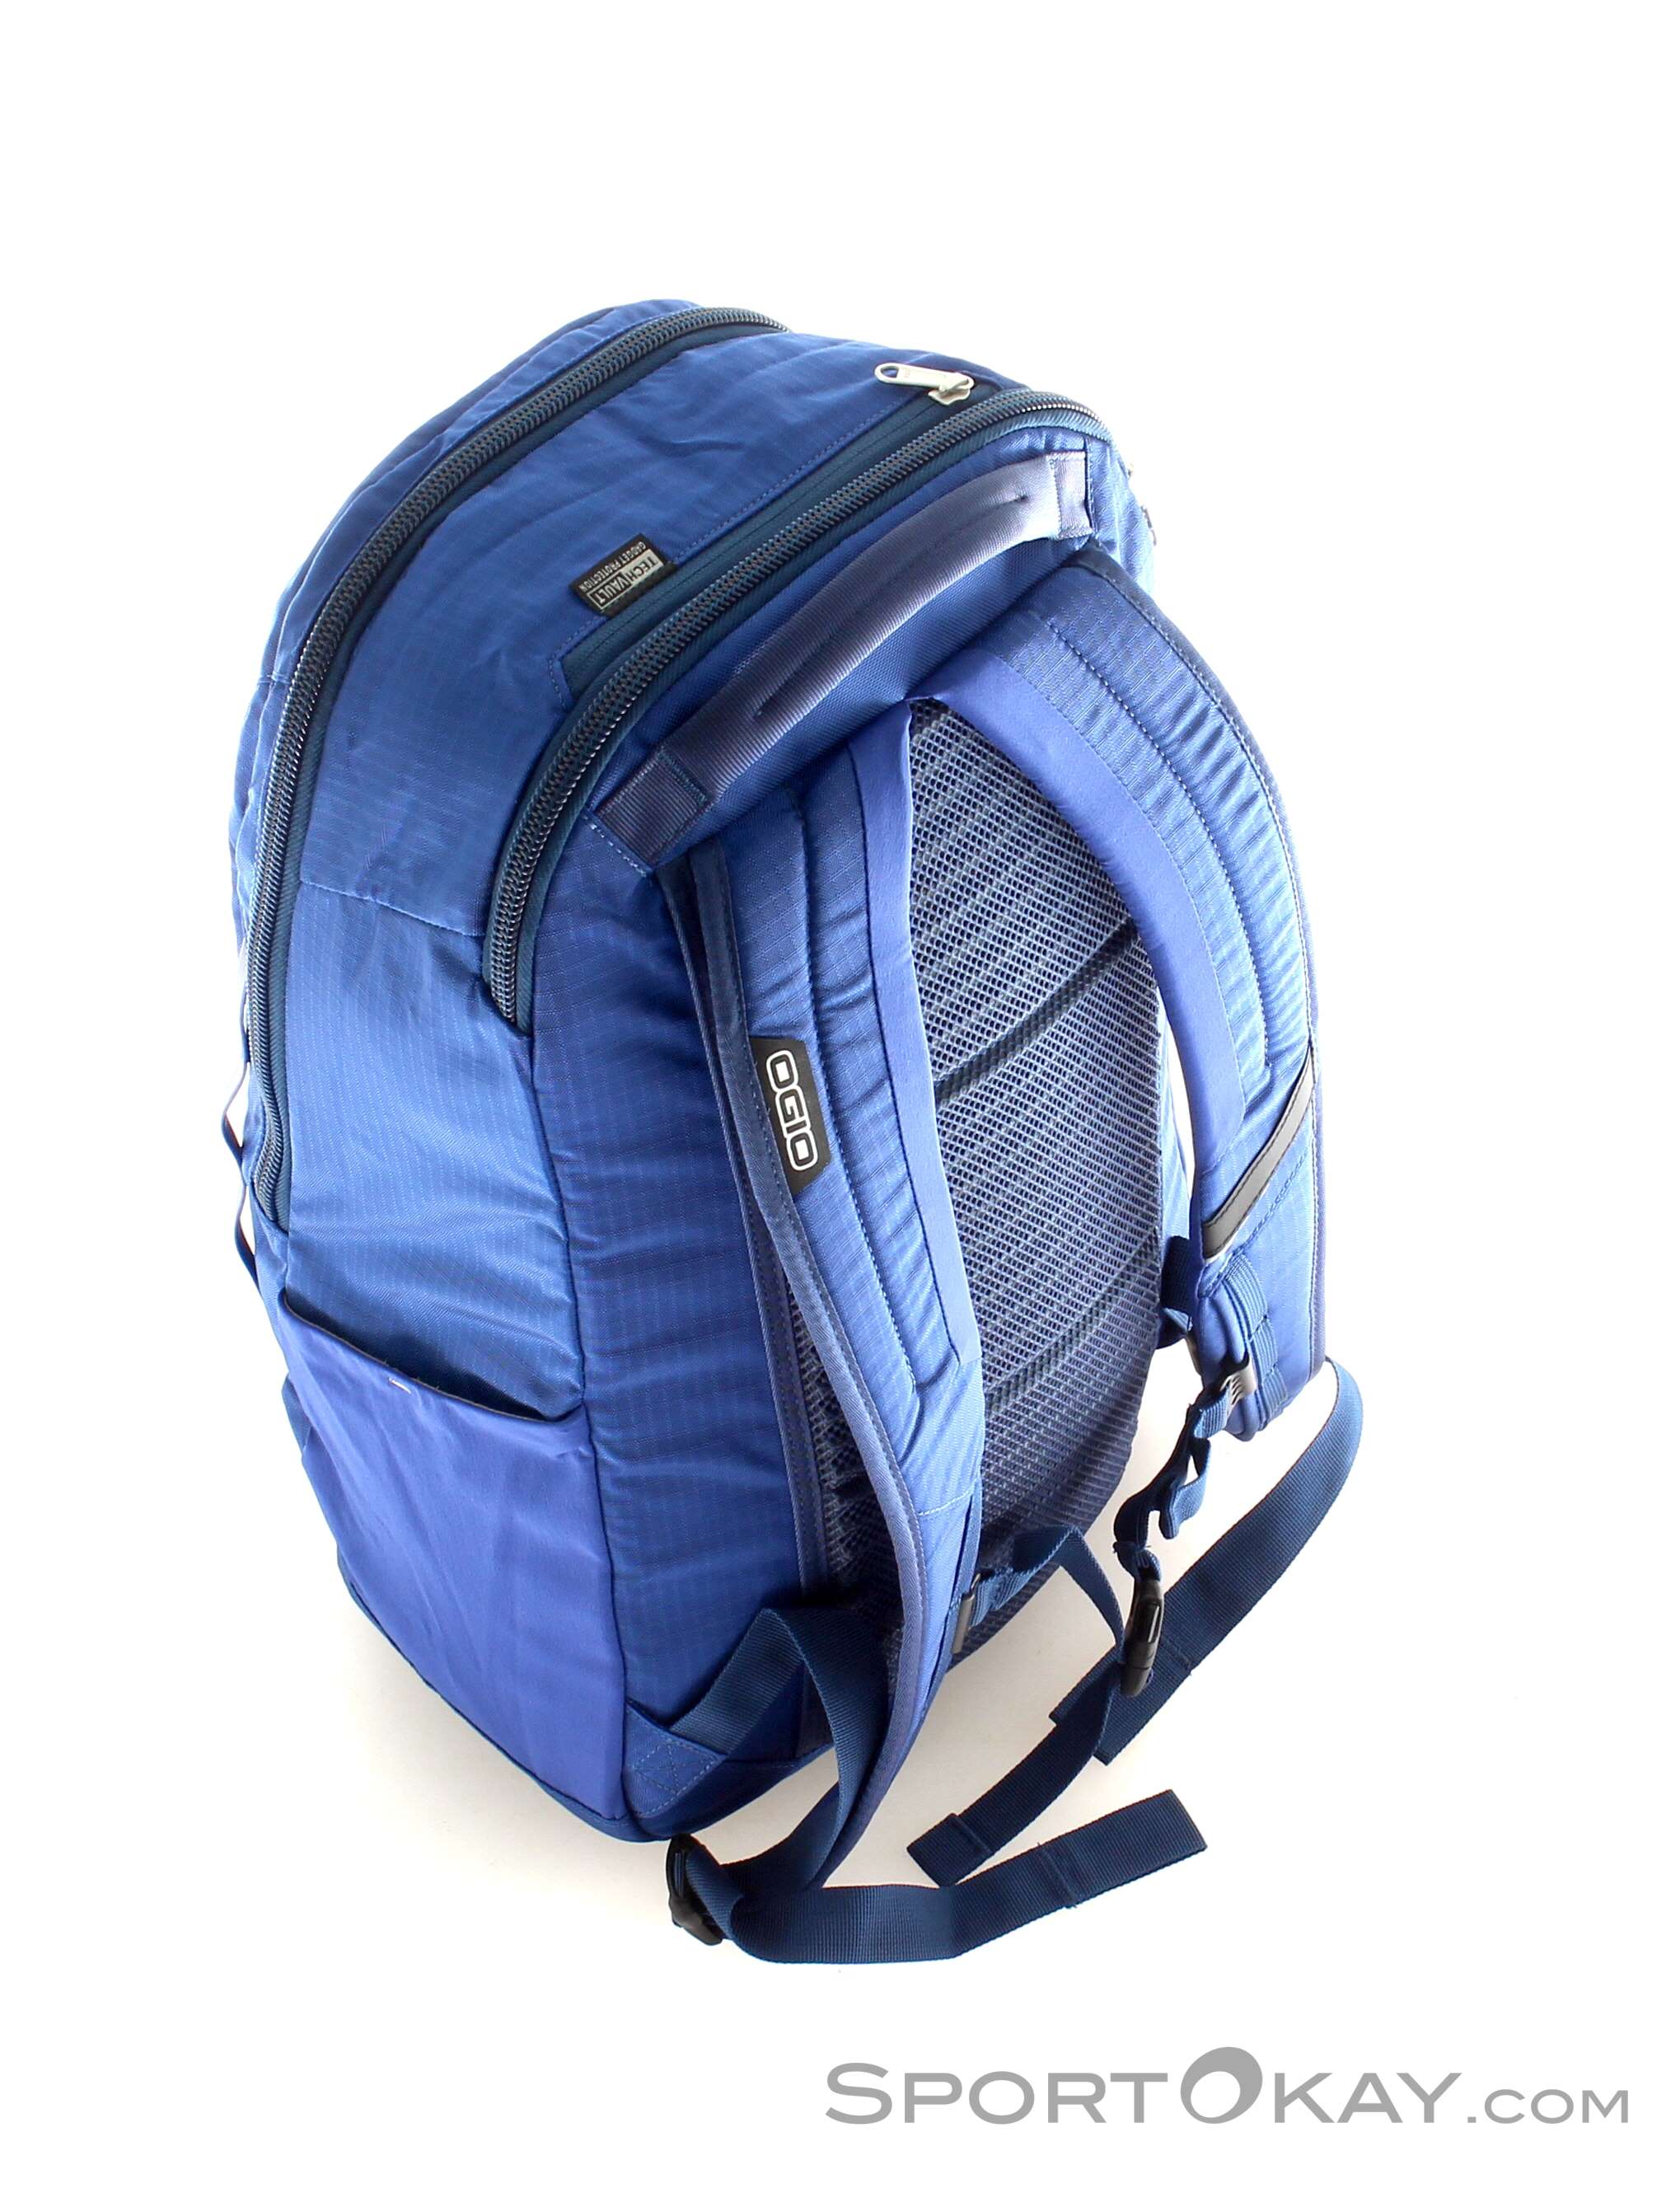 Ogio Apollo 20l Backpack - Bags - Leisure Bags - Fashion - All